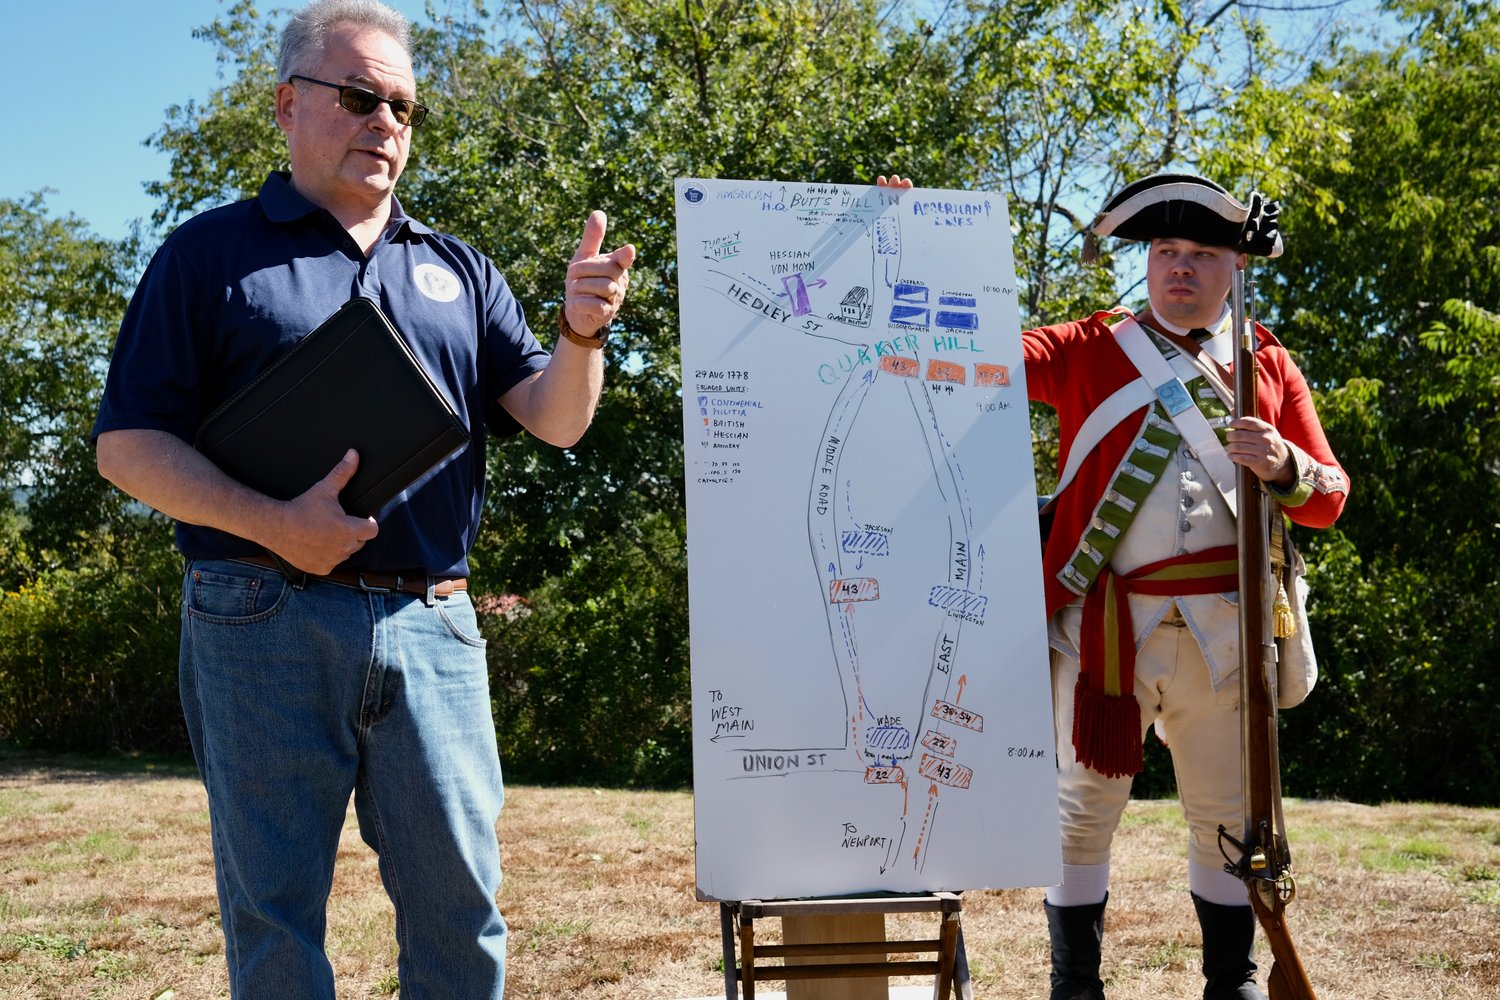 Paul Murphy (left), a member of the Battle of Rhode Island Association, explains how the 1778 battle of Rhode Island played out in Portsmouth during Saturday’s well-attended event at Heritage Park. At right is Seth Chiaro, a member of the 54th Regiment of Foot.